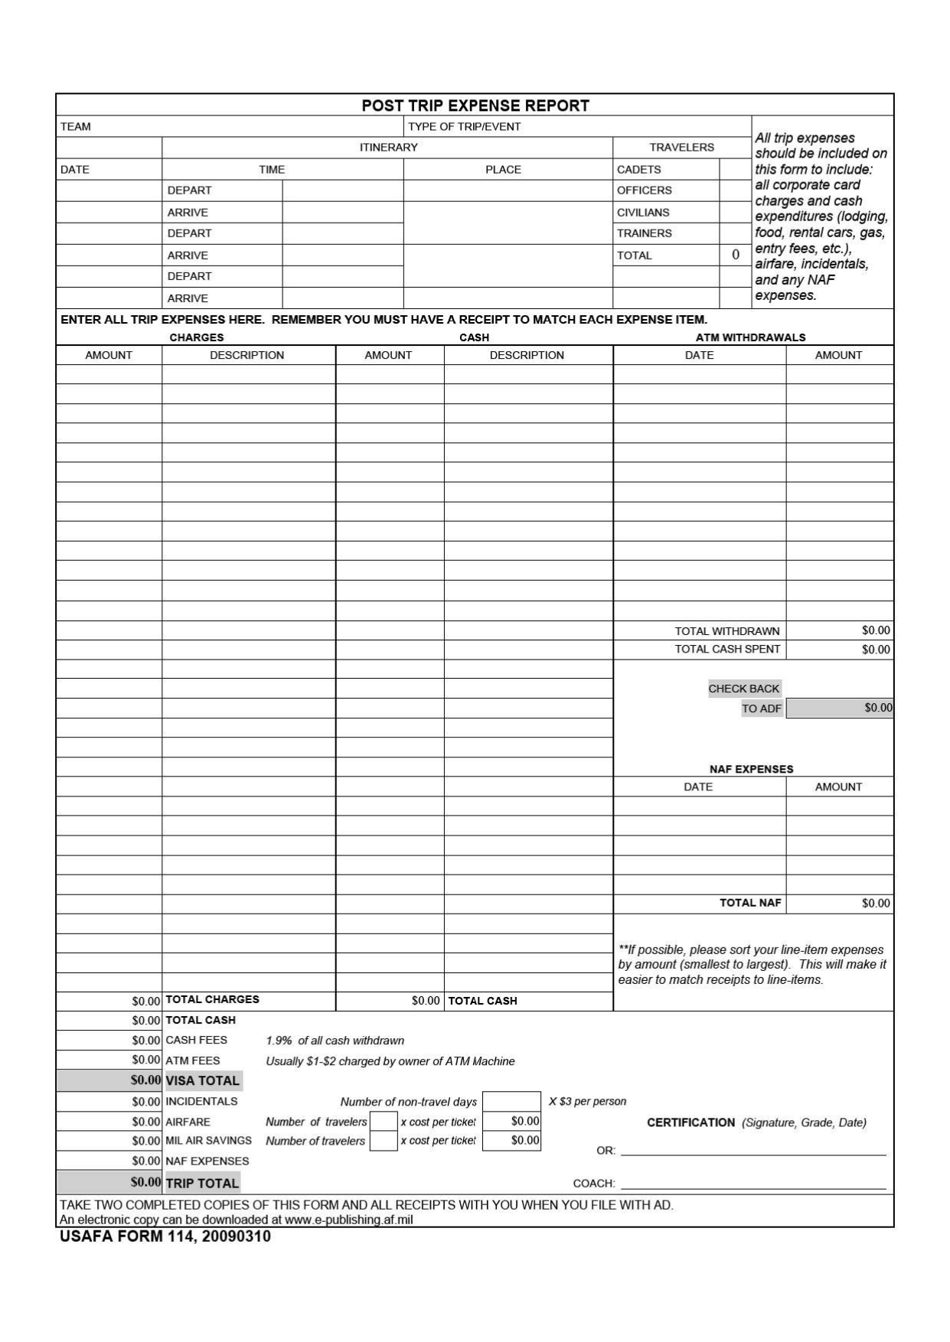 USAFA Form 114 Post Trip Expense Report, Page 1